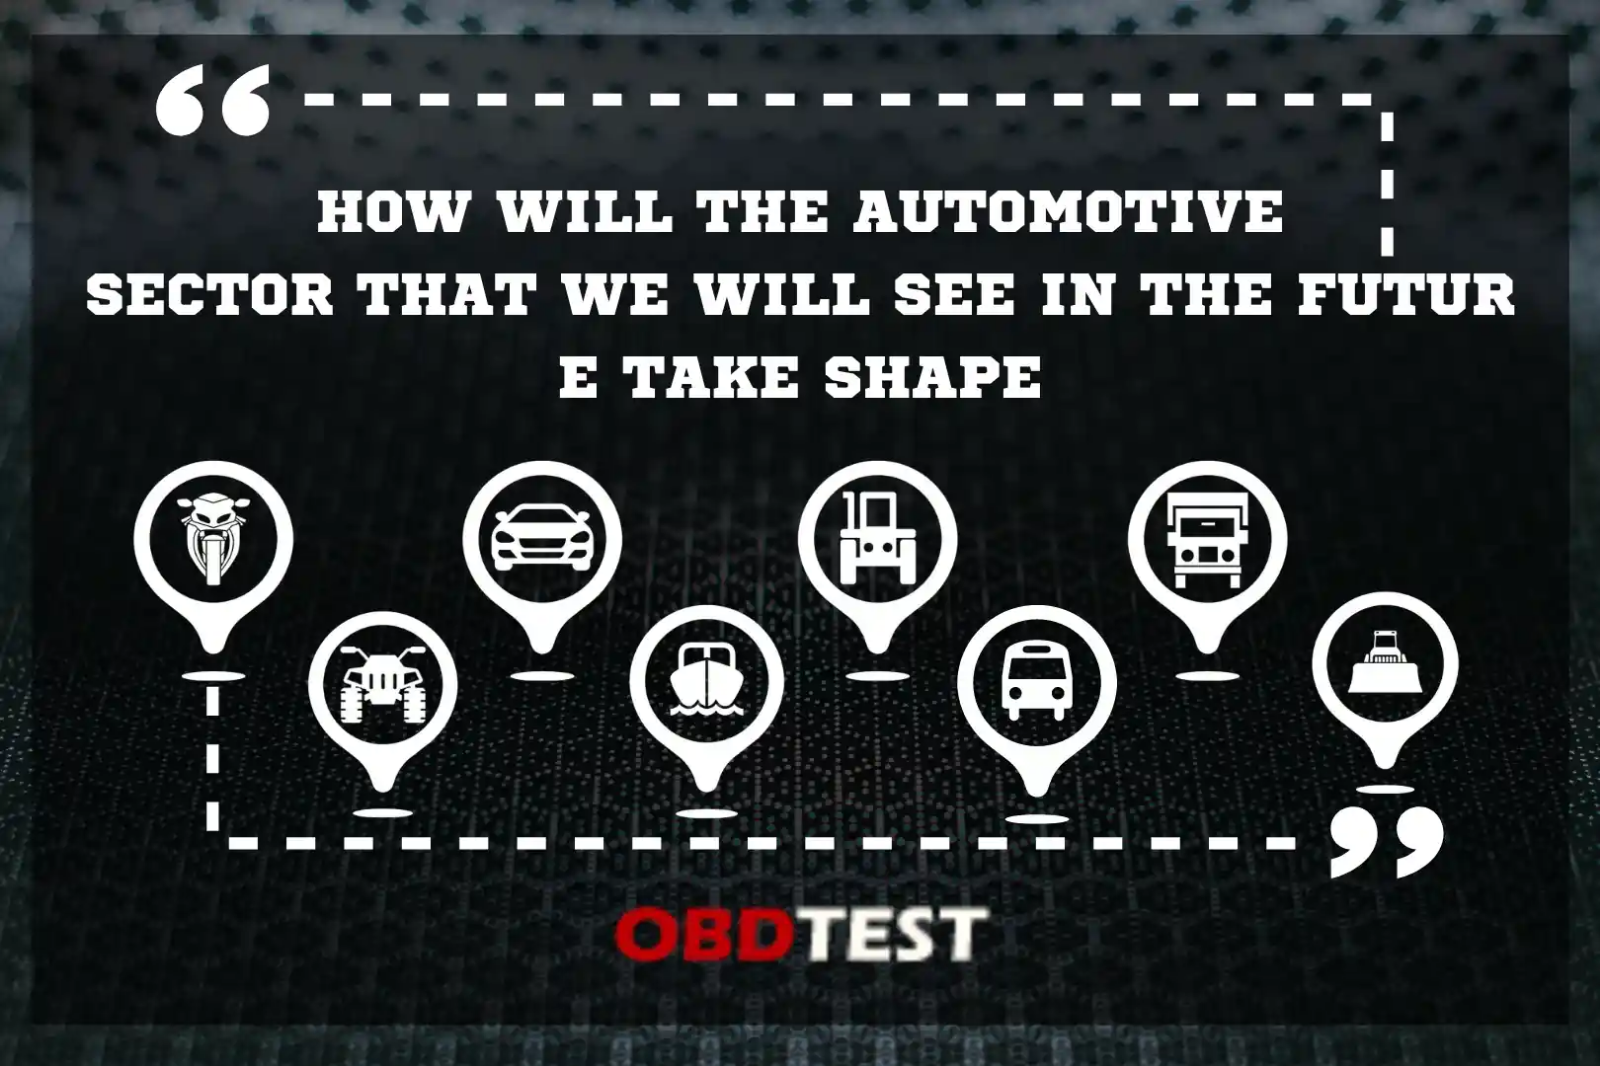 How will the automotive sector be in the future?